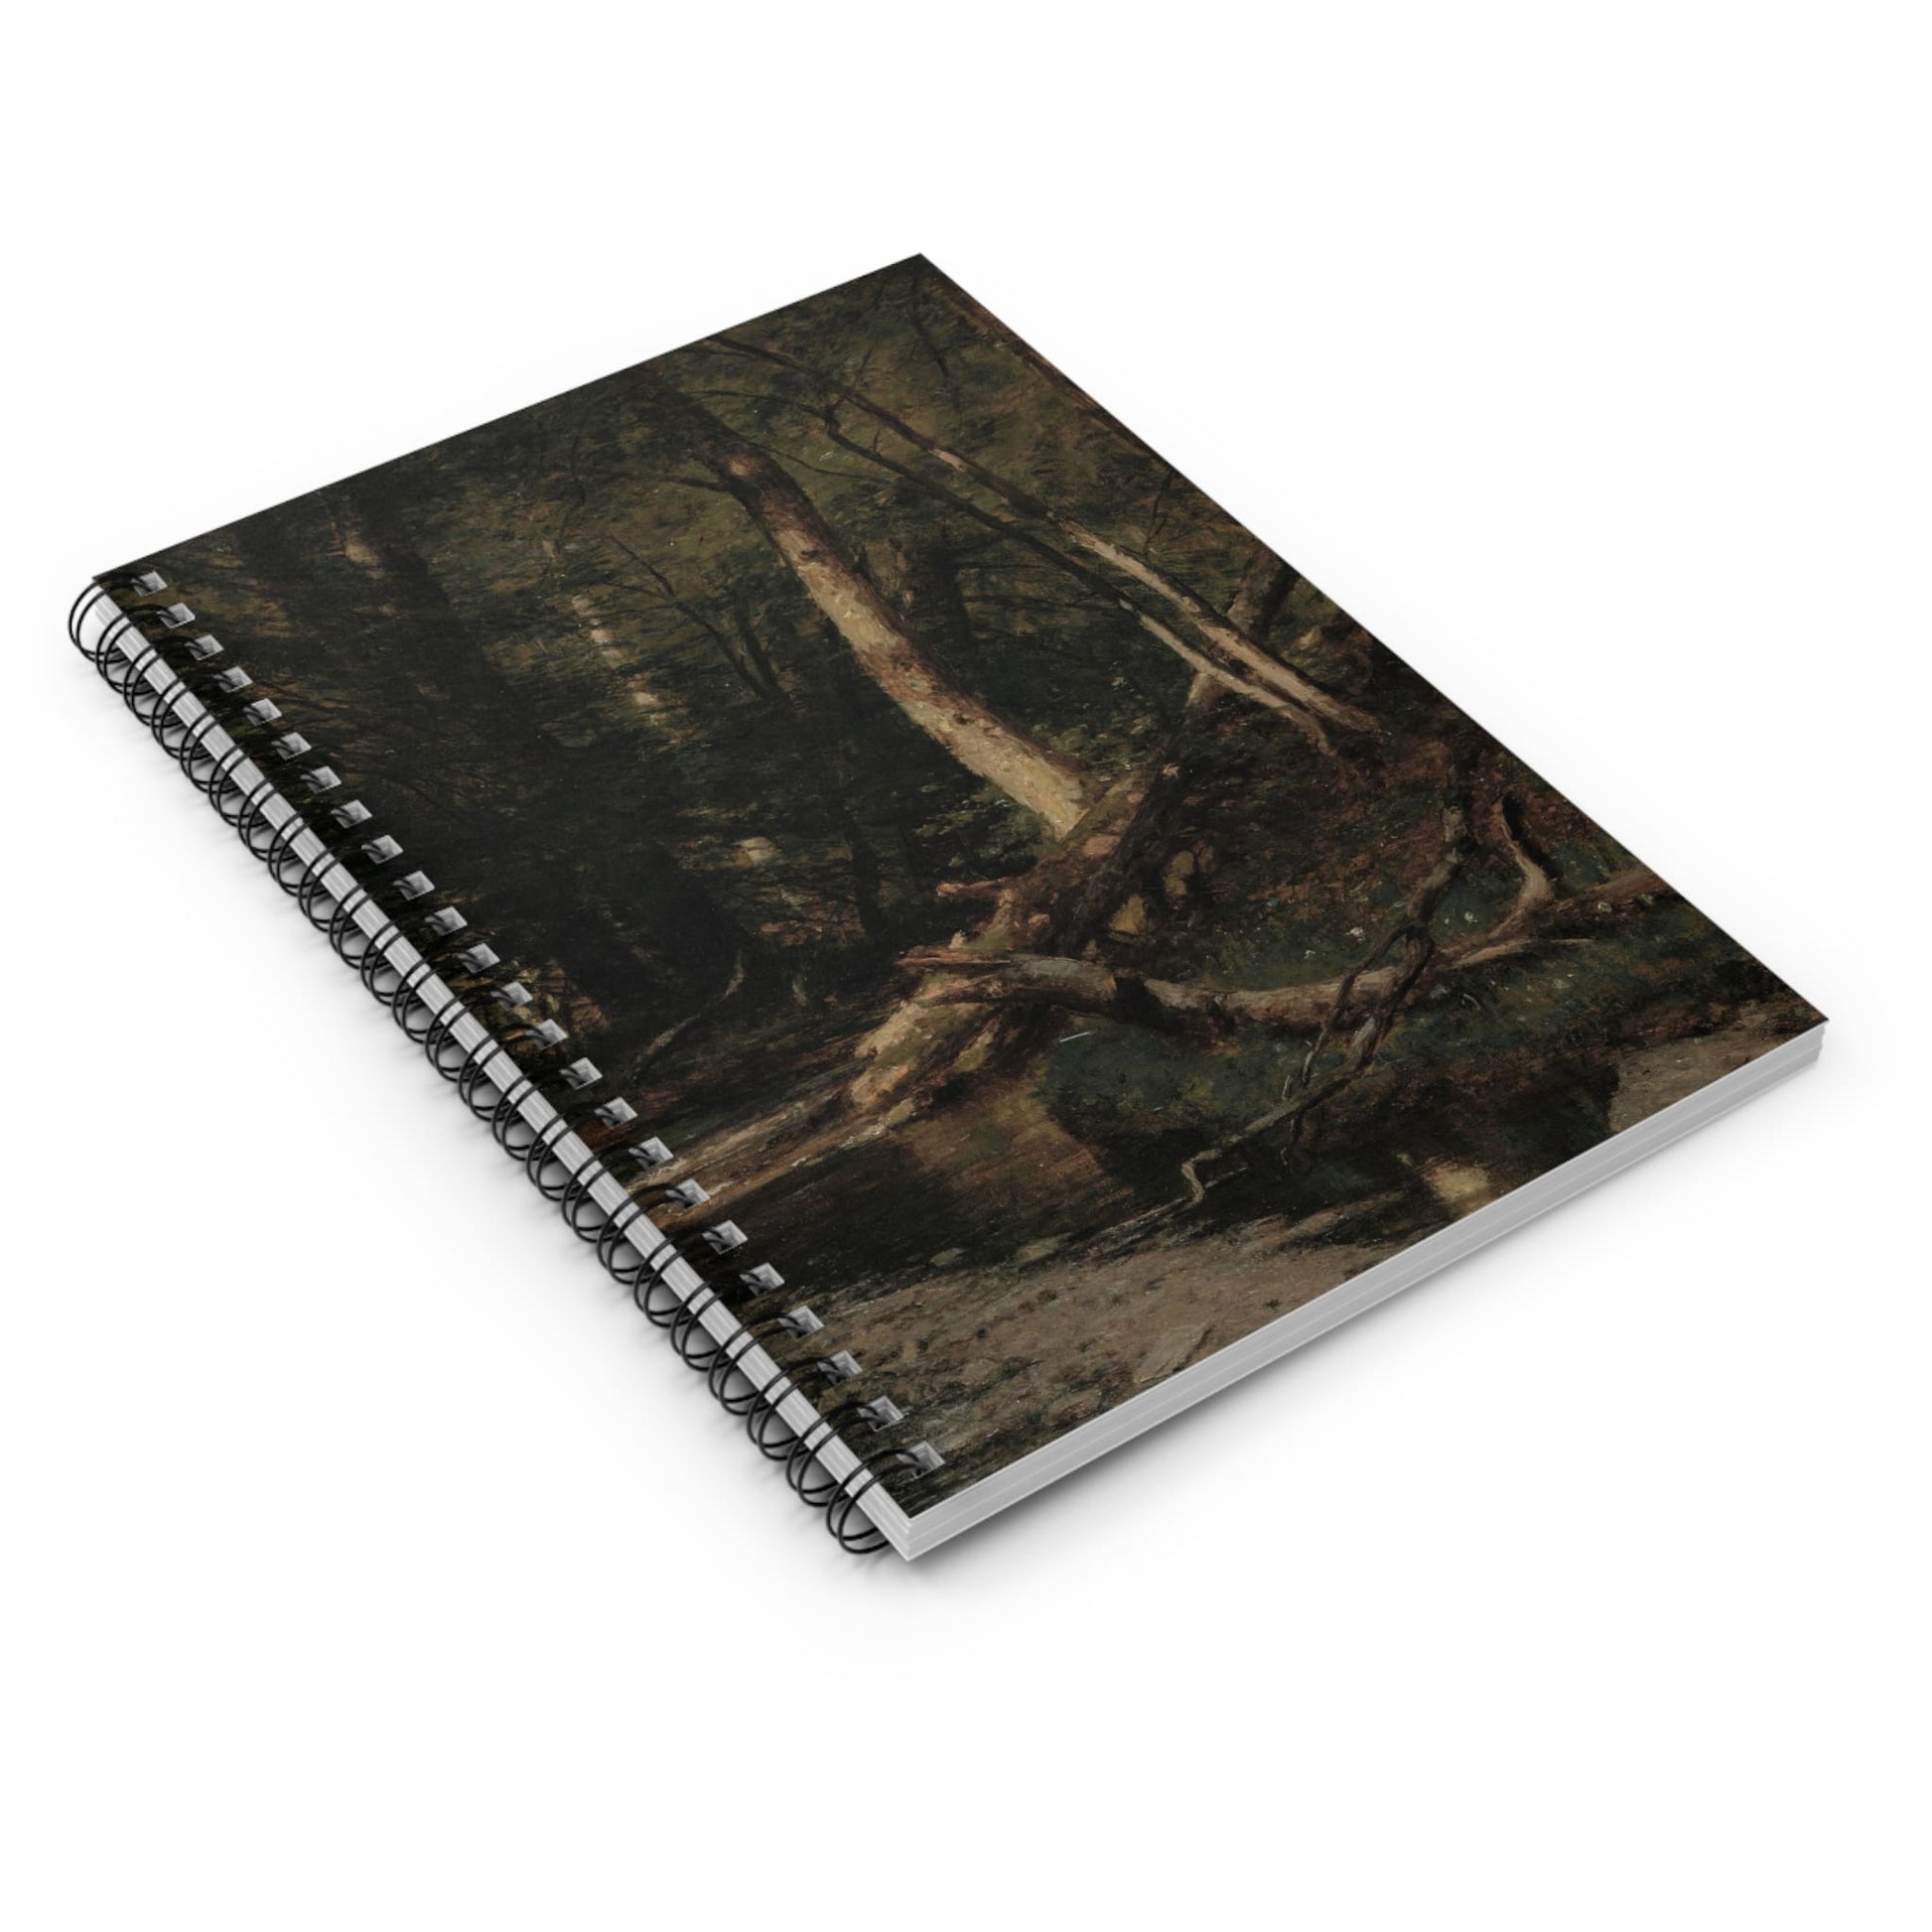 Dark Forest Spiral Notebook Laying Flat on White Surface